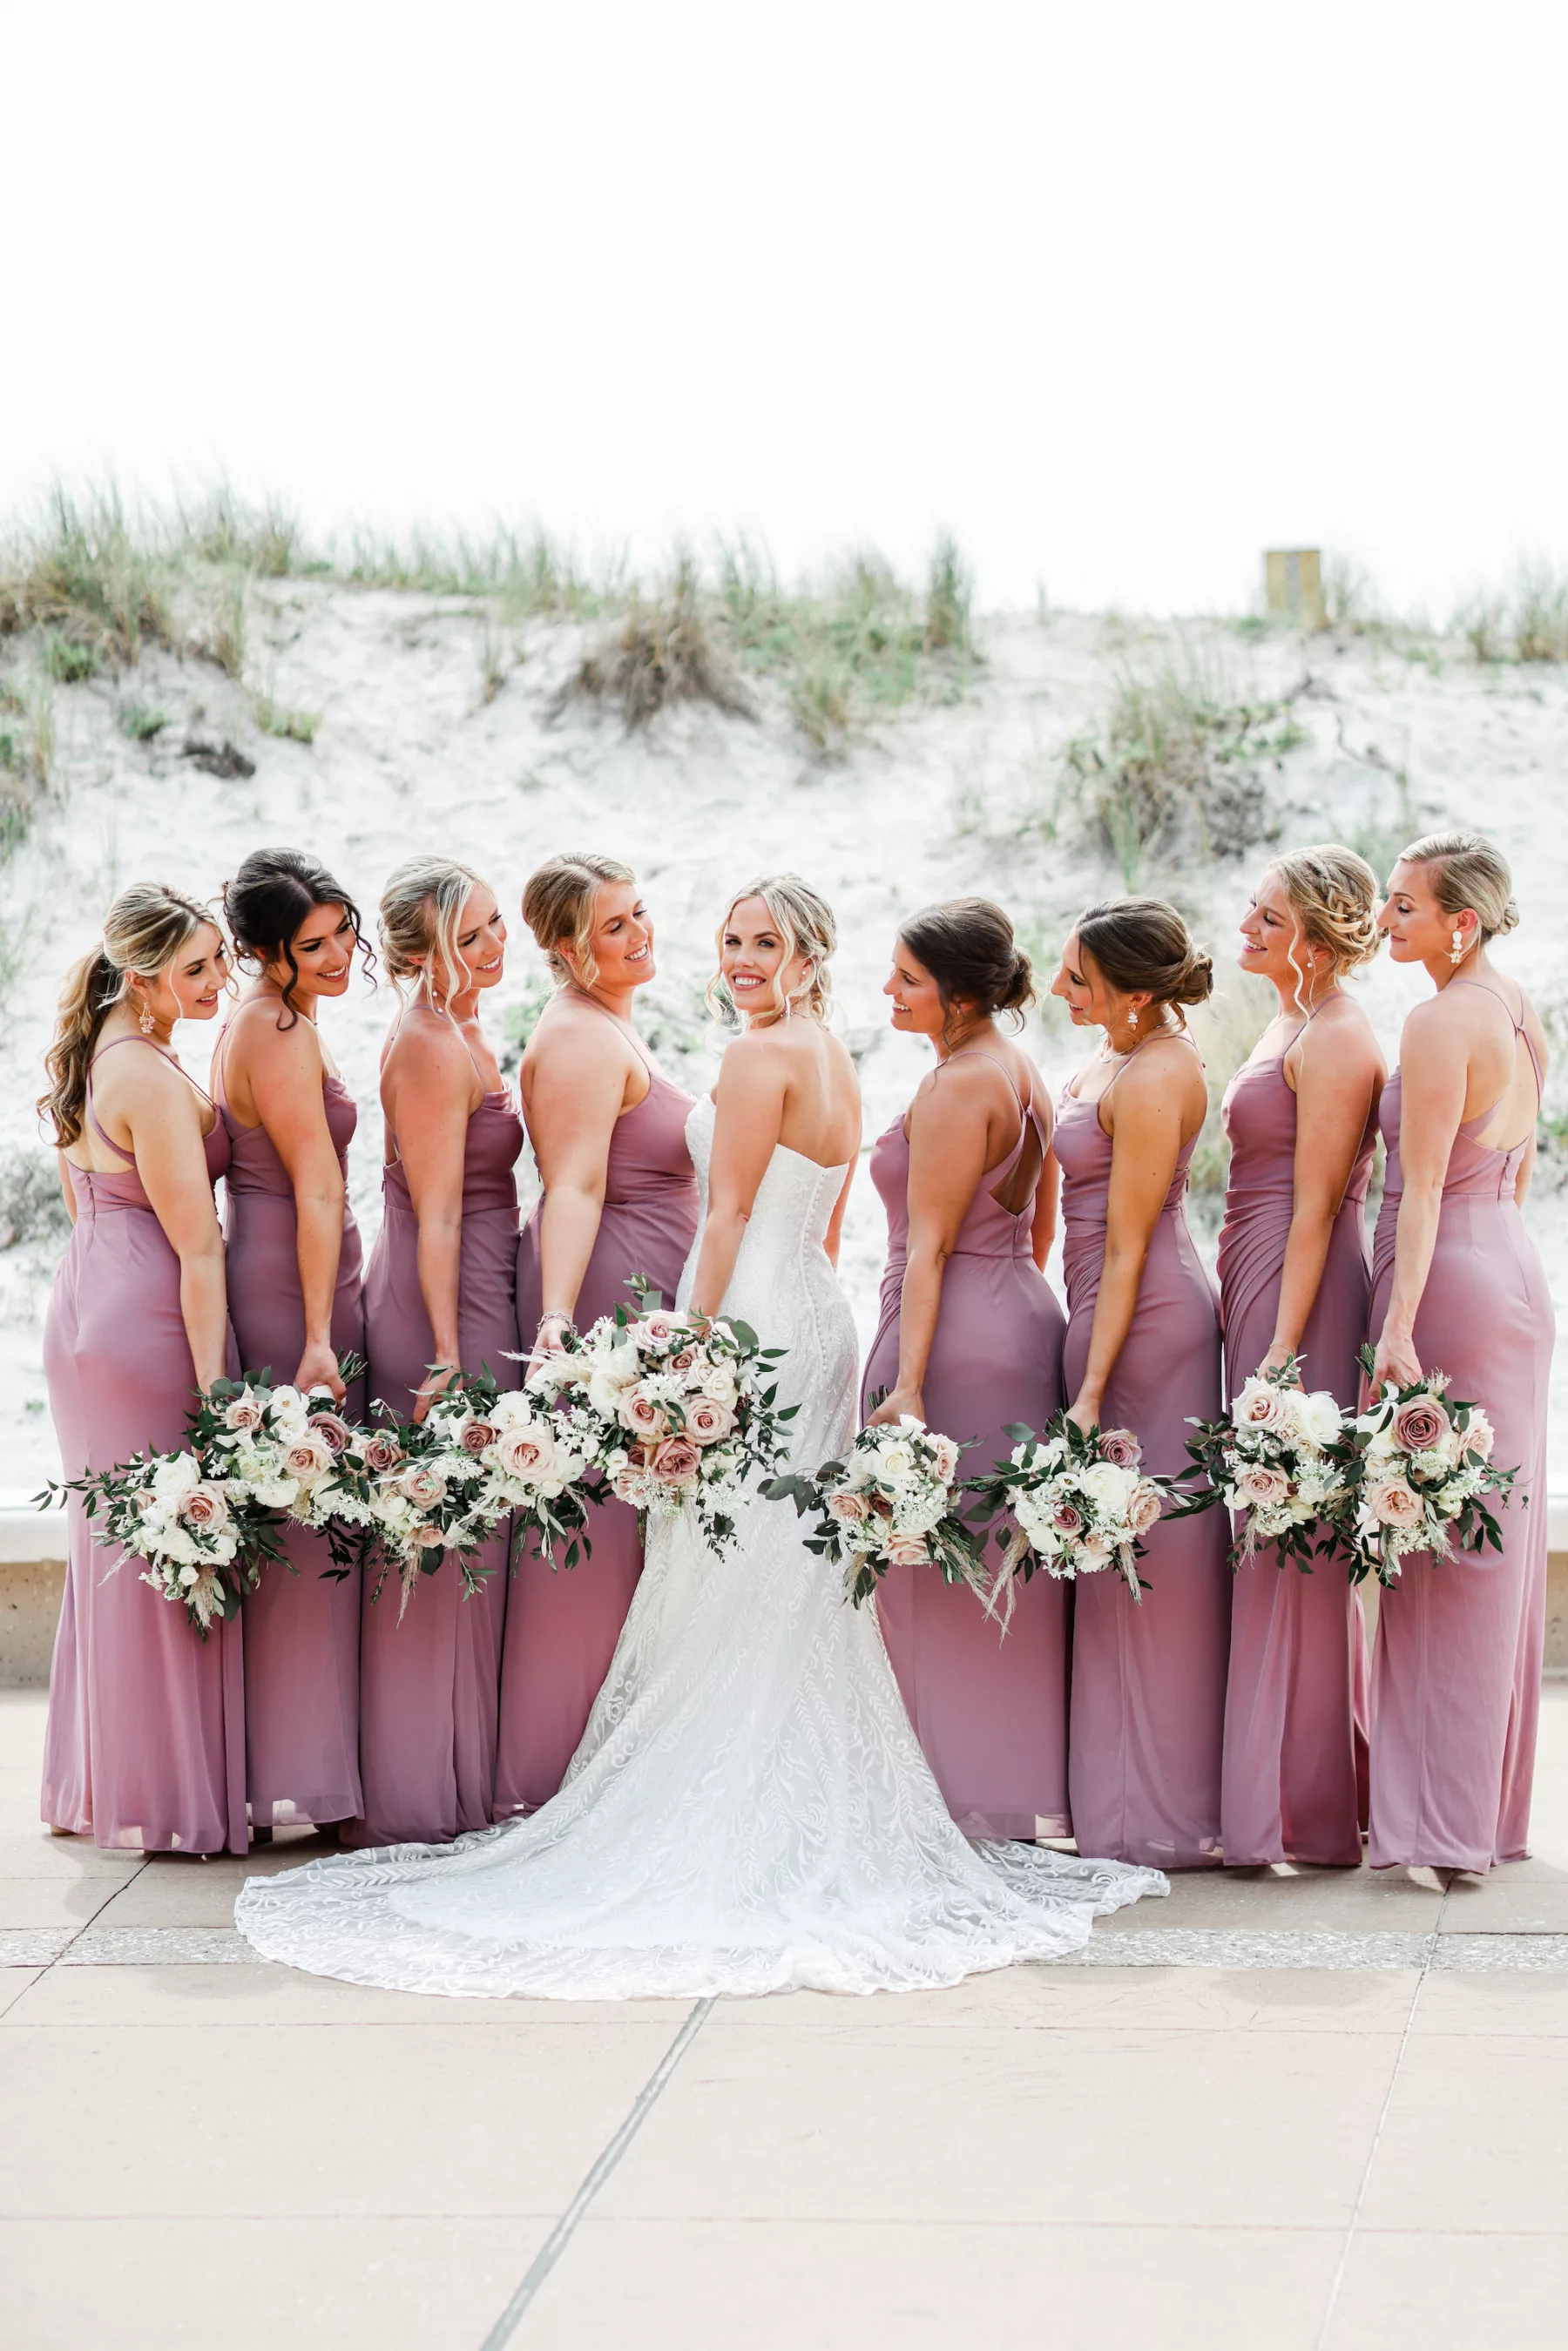 Matching Mauve Bridesmaids Dresses Inspiration | Boho Wedding Bouquet Ideas with Pink, Purple, and White Roses, Pampas Grass, and Greenery | Clearwater Hair and Makeup Artist Femme Akoi Beauty Studio